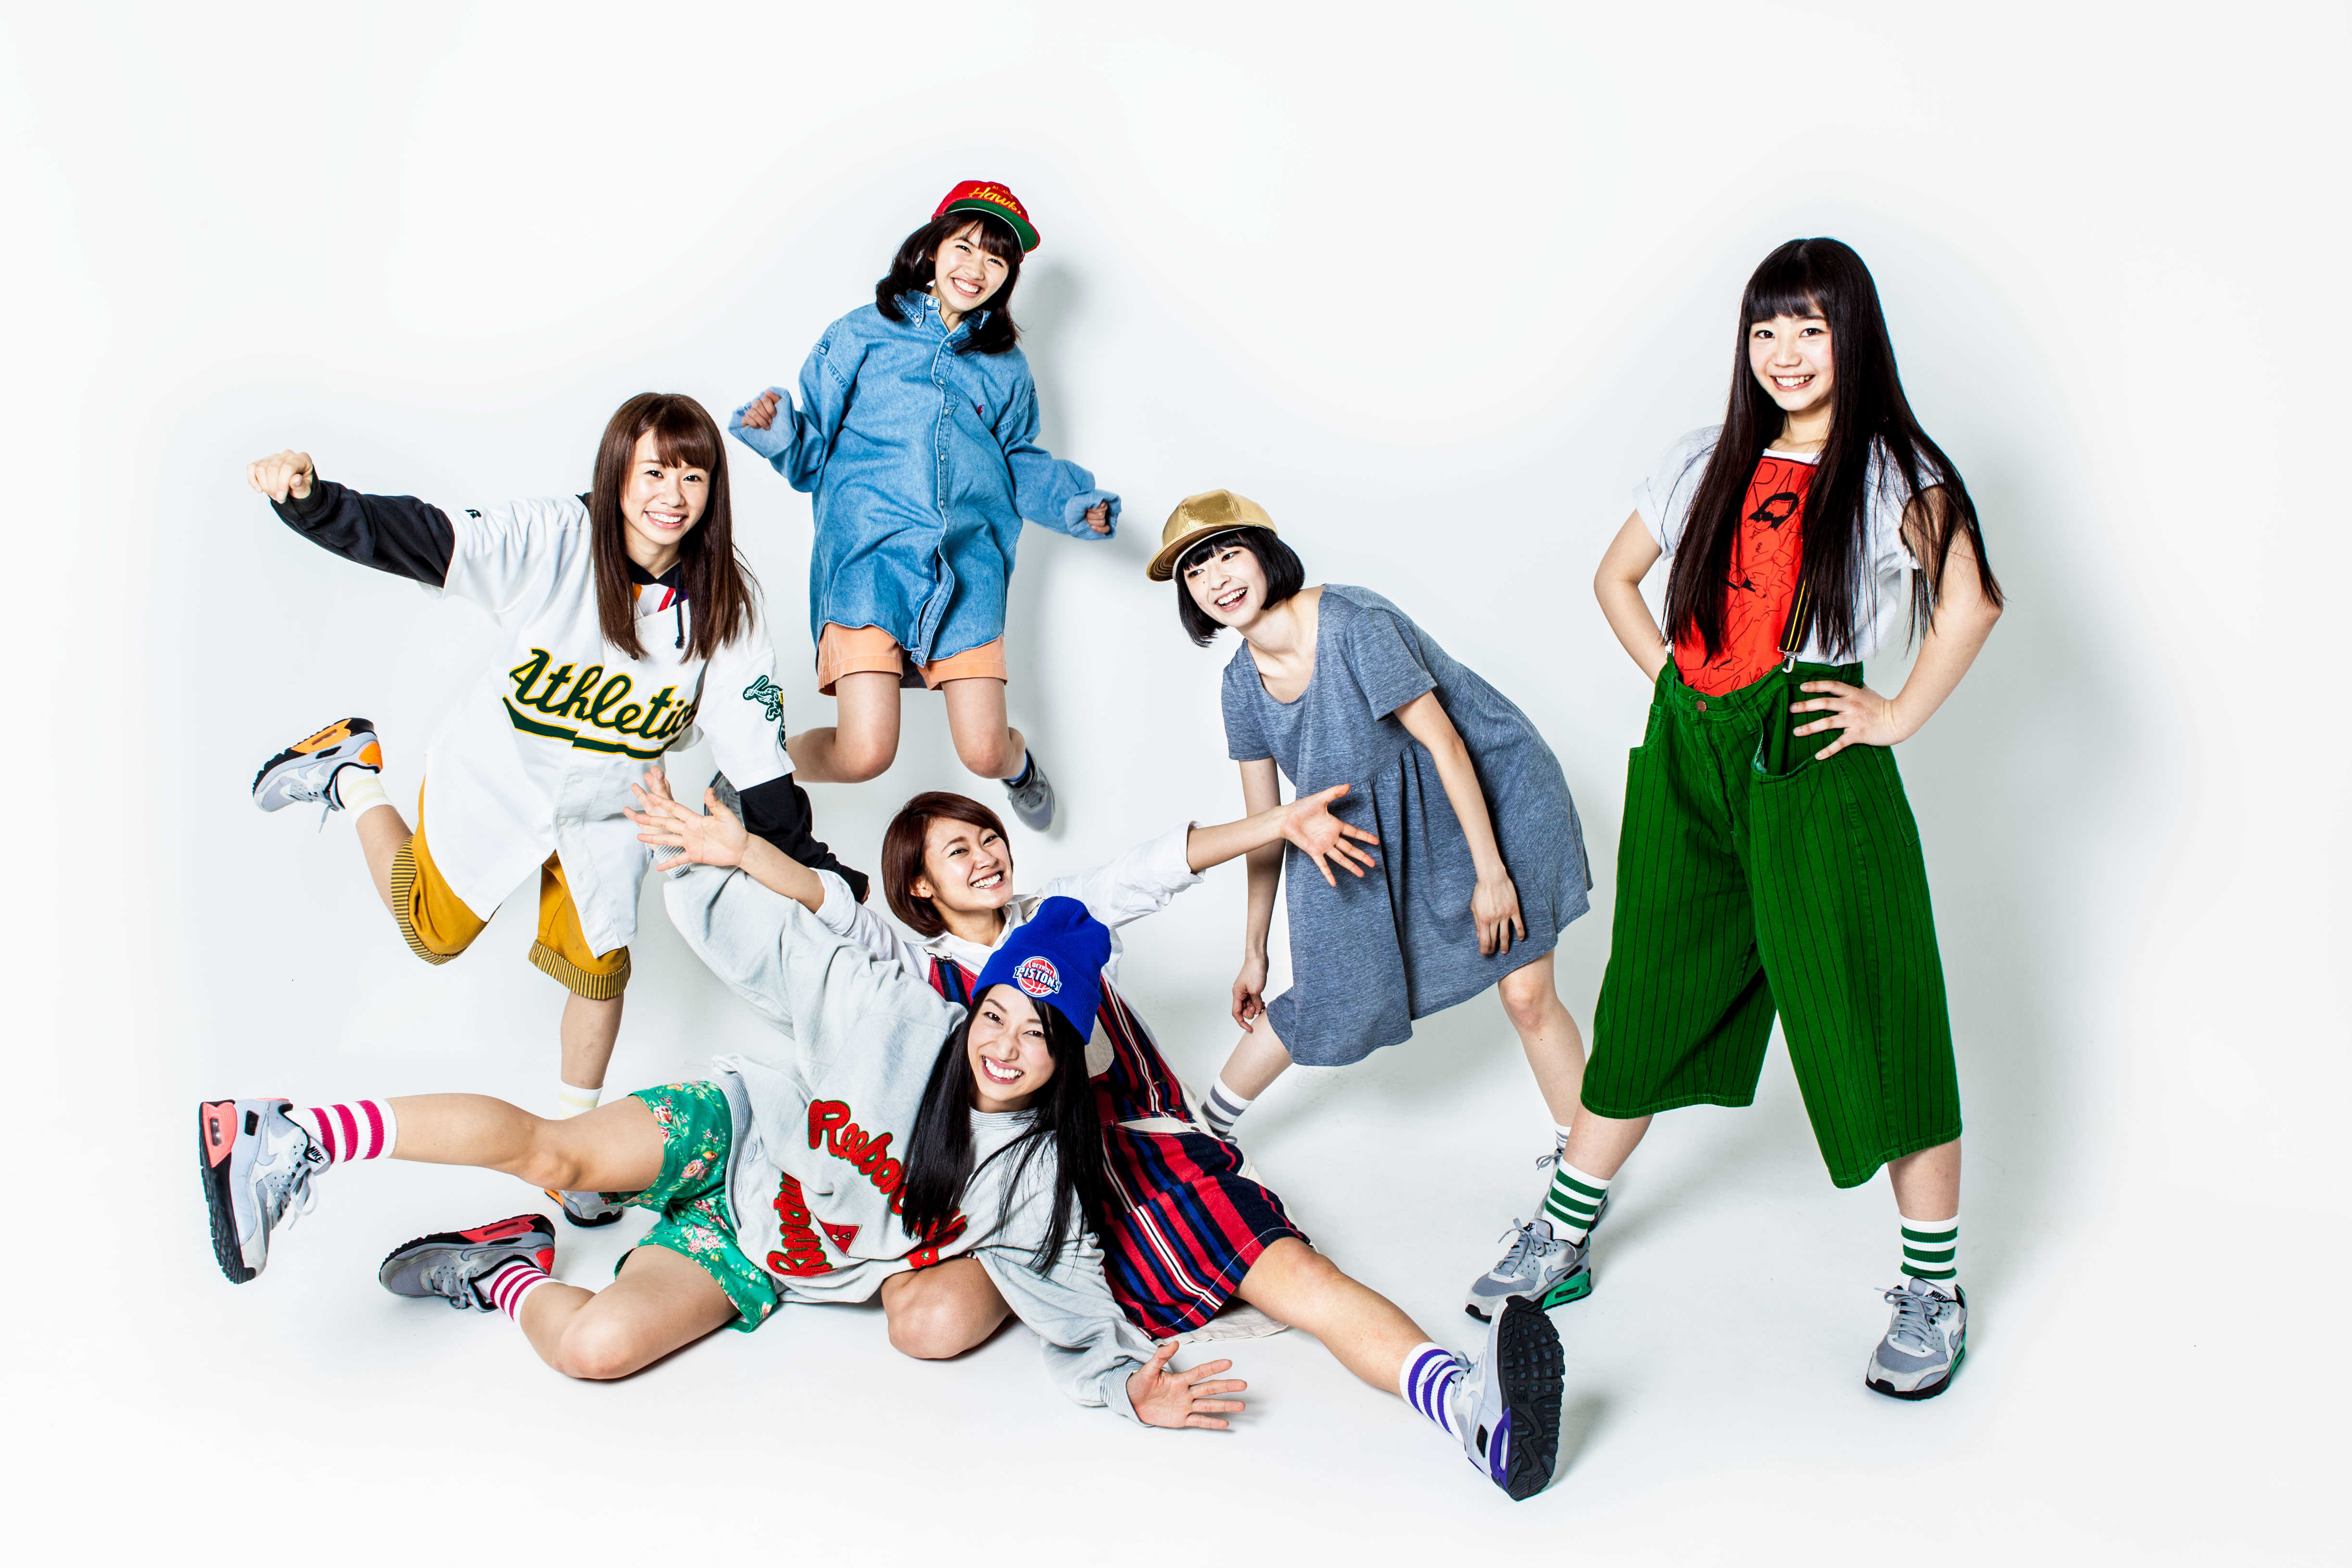 Lyrical School is ready to assault you with wackiness.